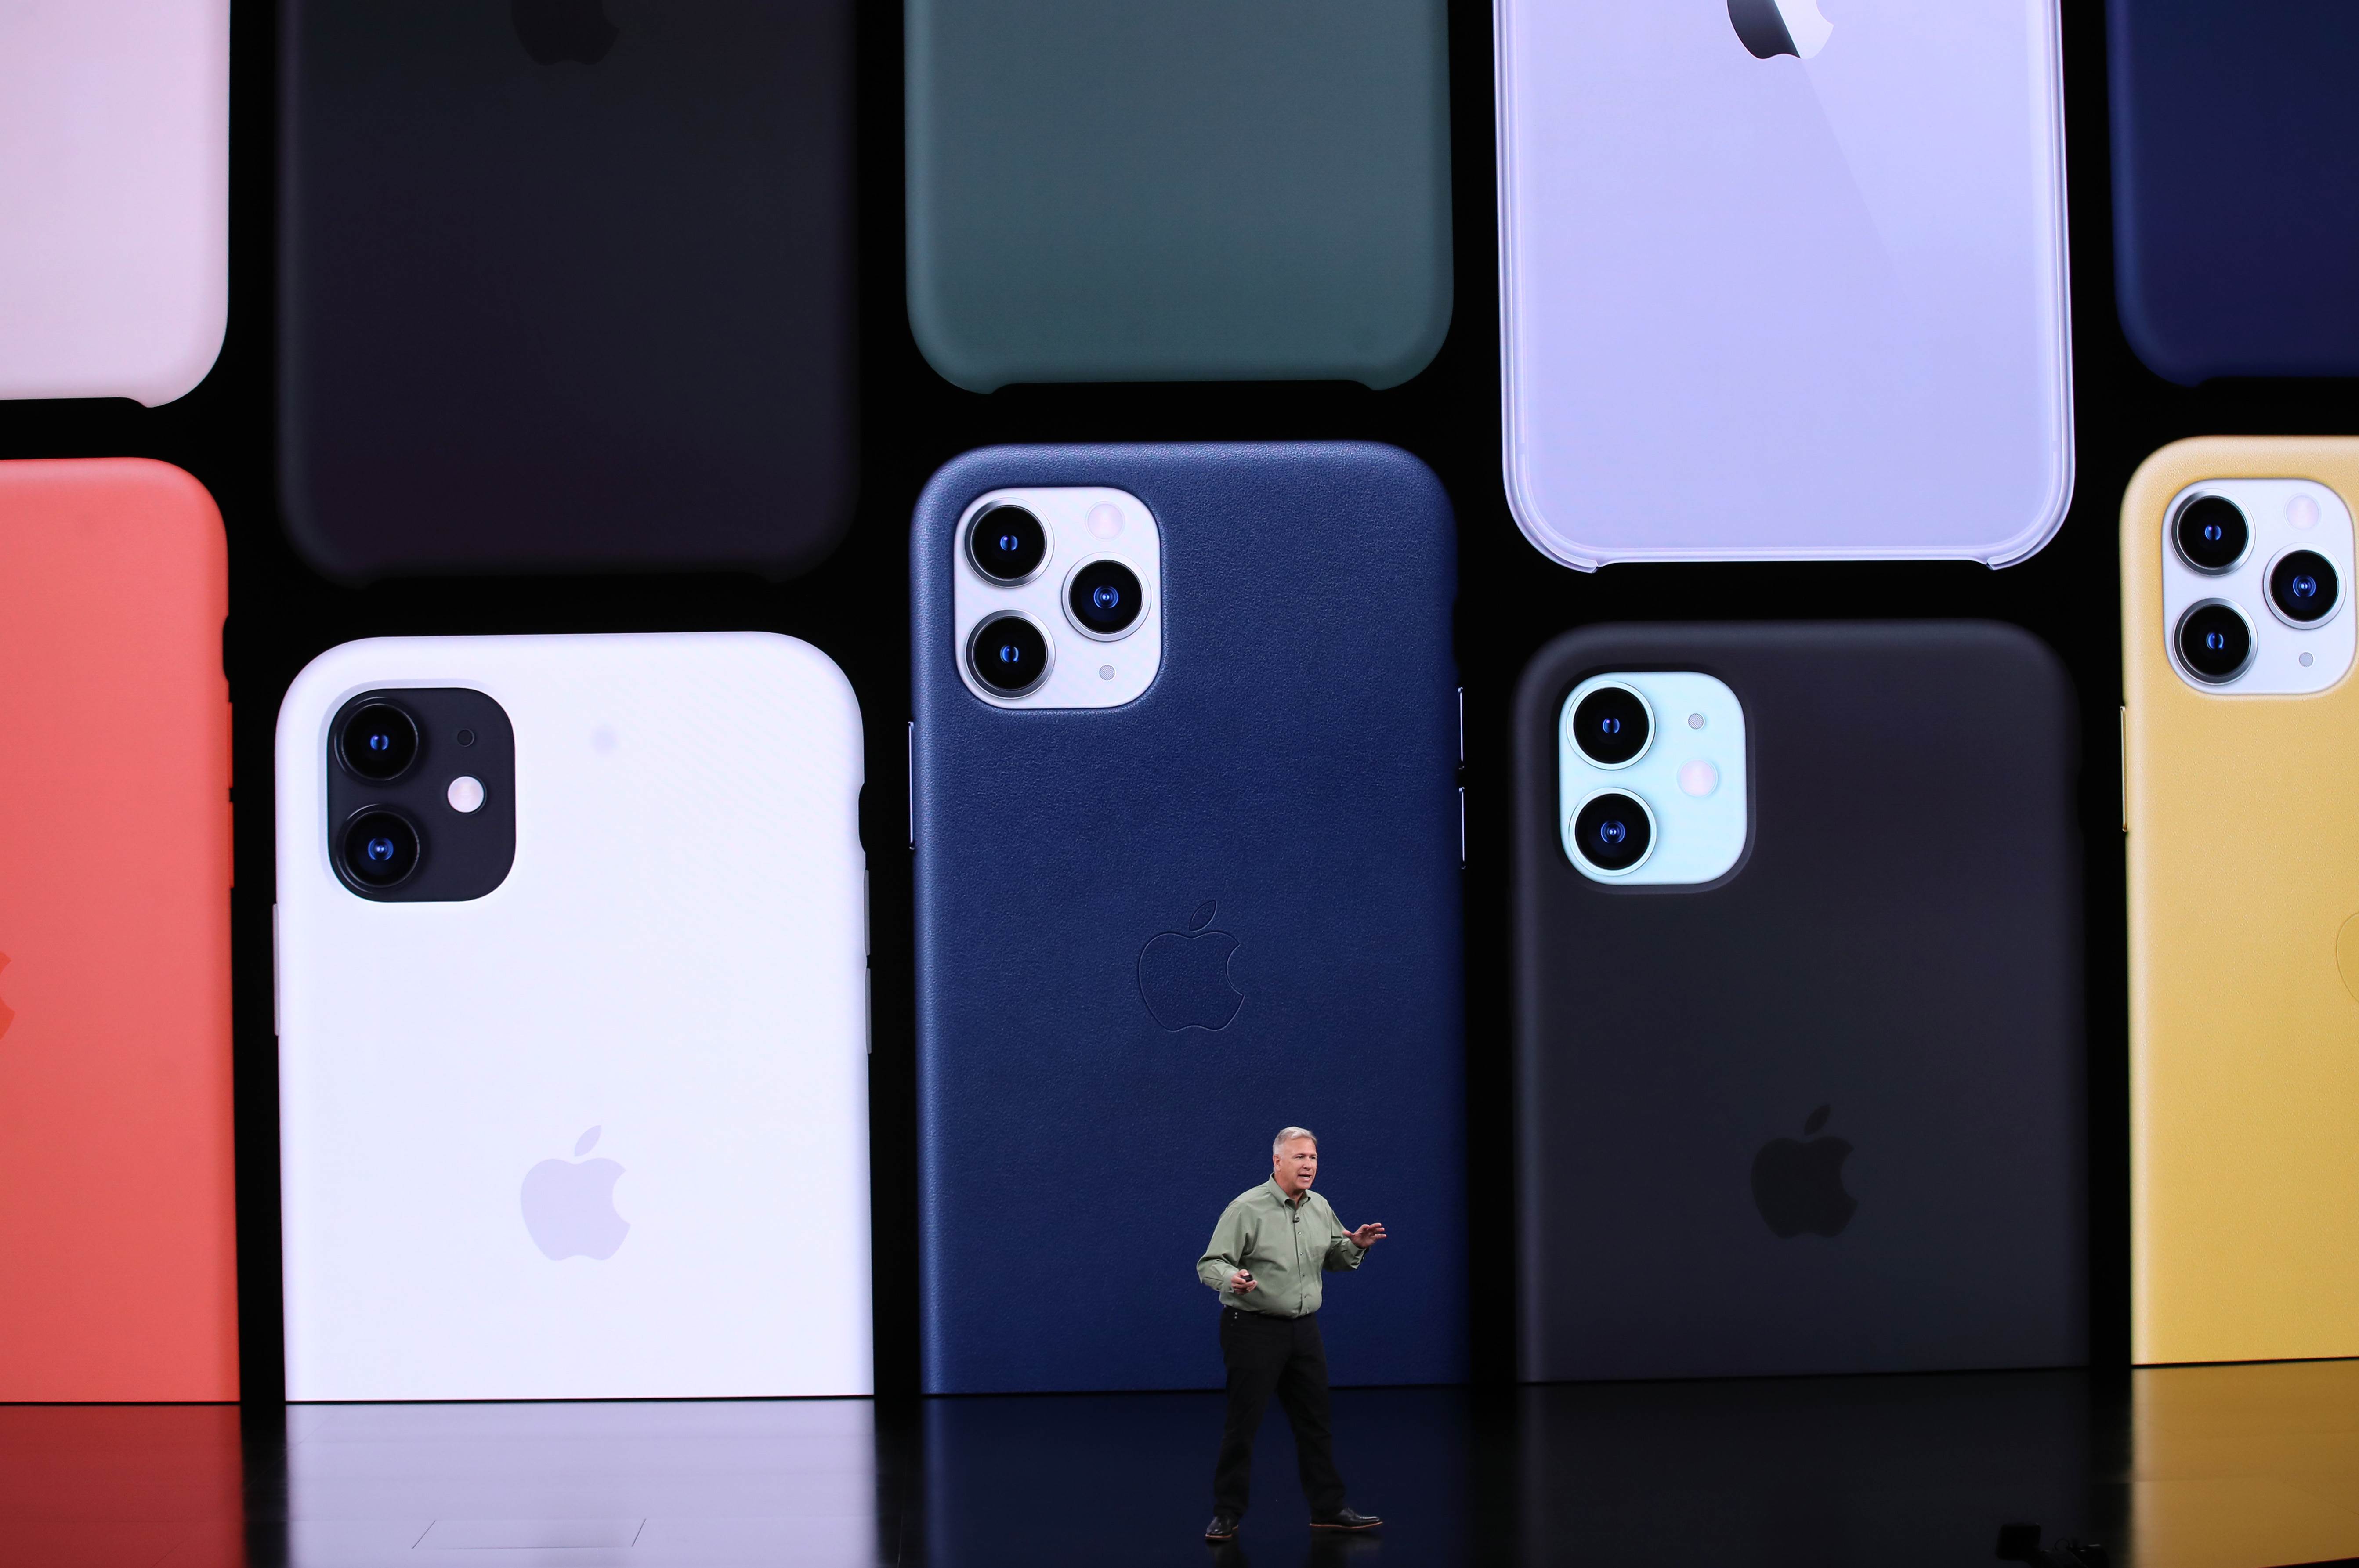 iphone 11 colors midnight green